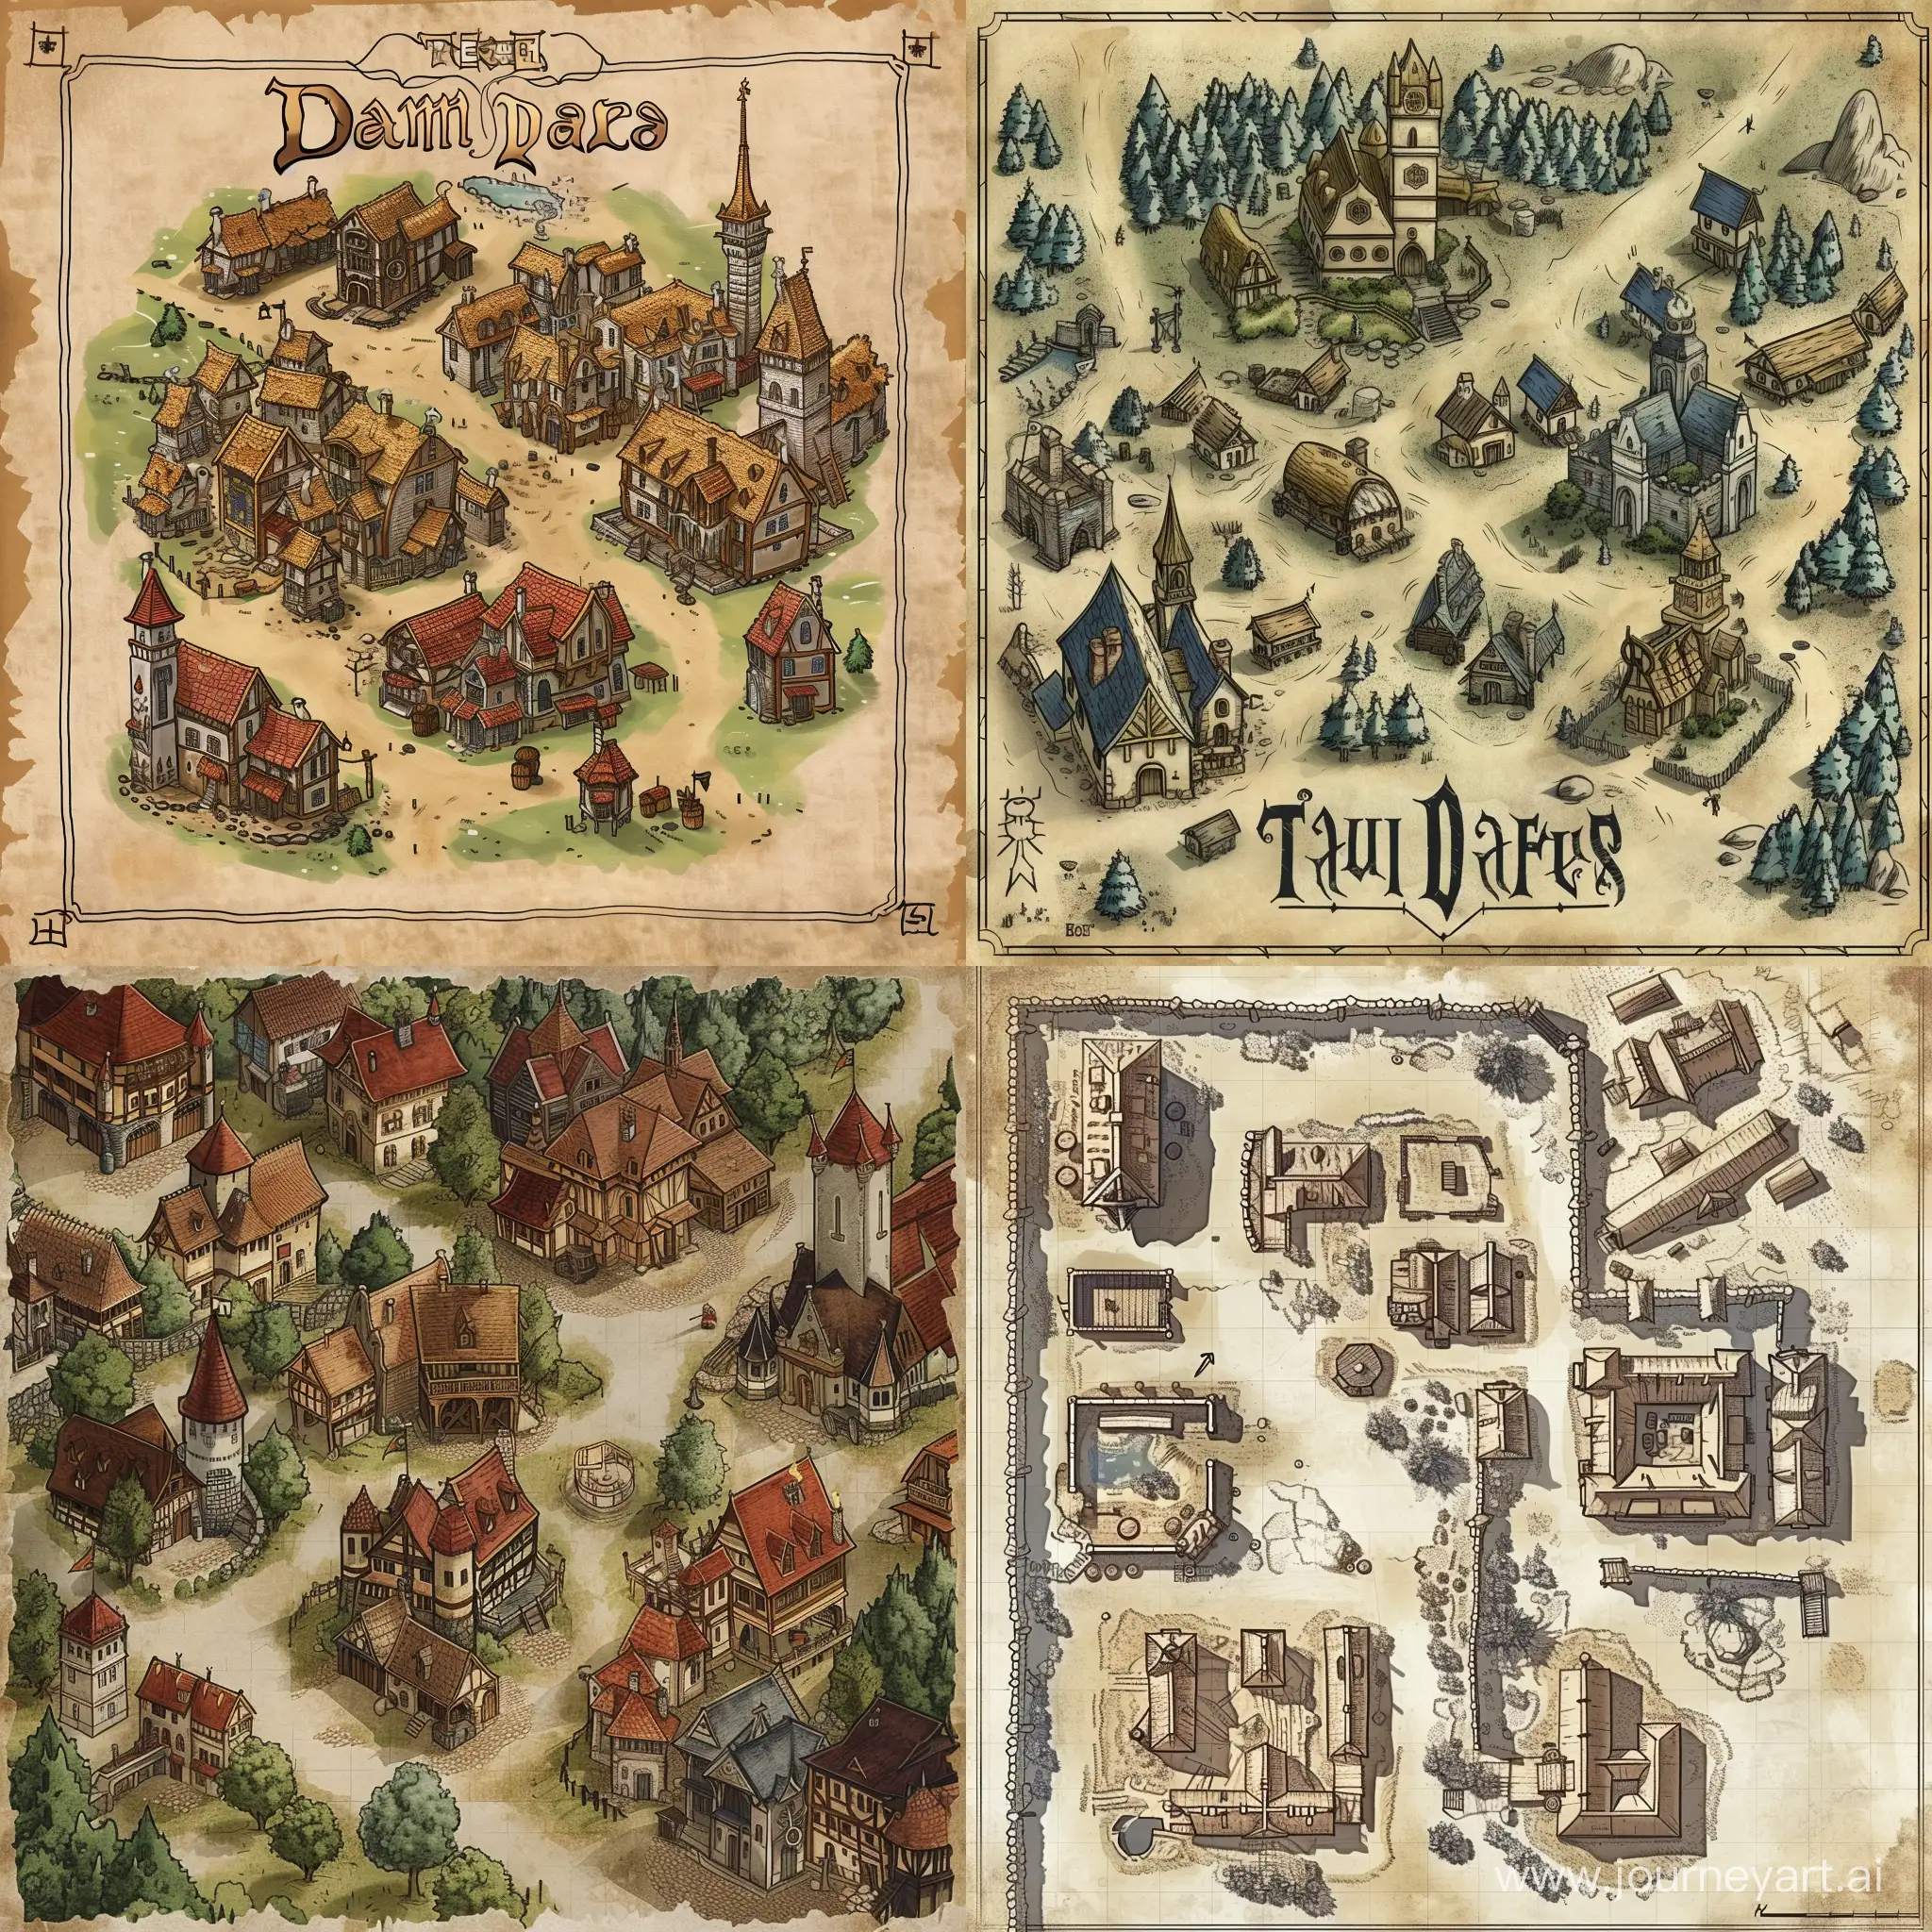 location map dungeon and dragons without grid, location - town, taverns, buildings